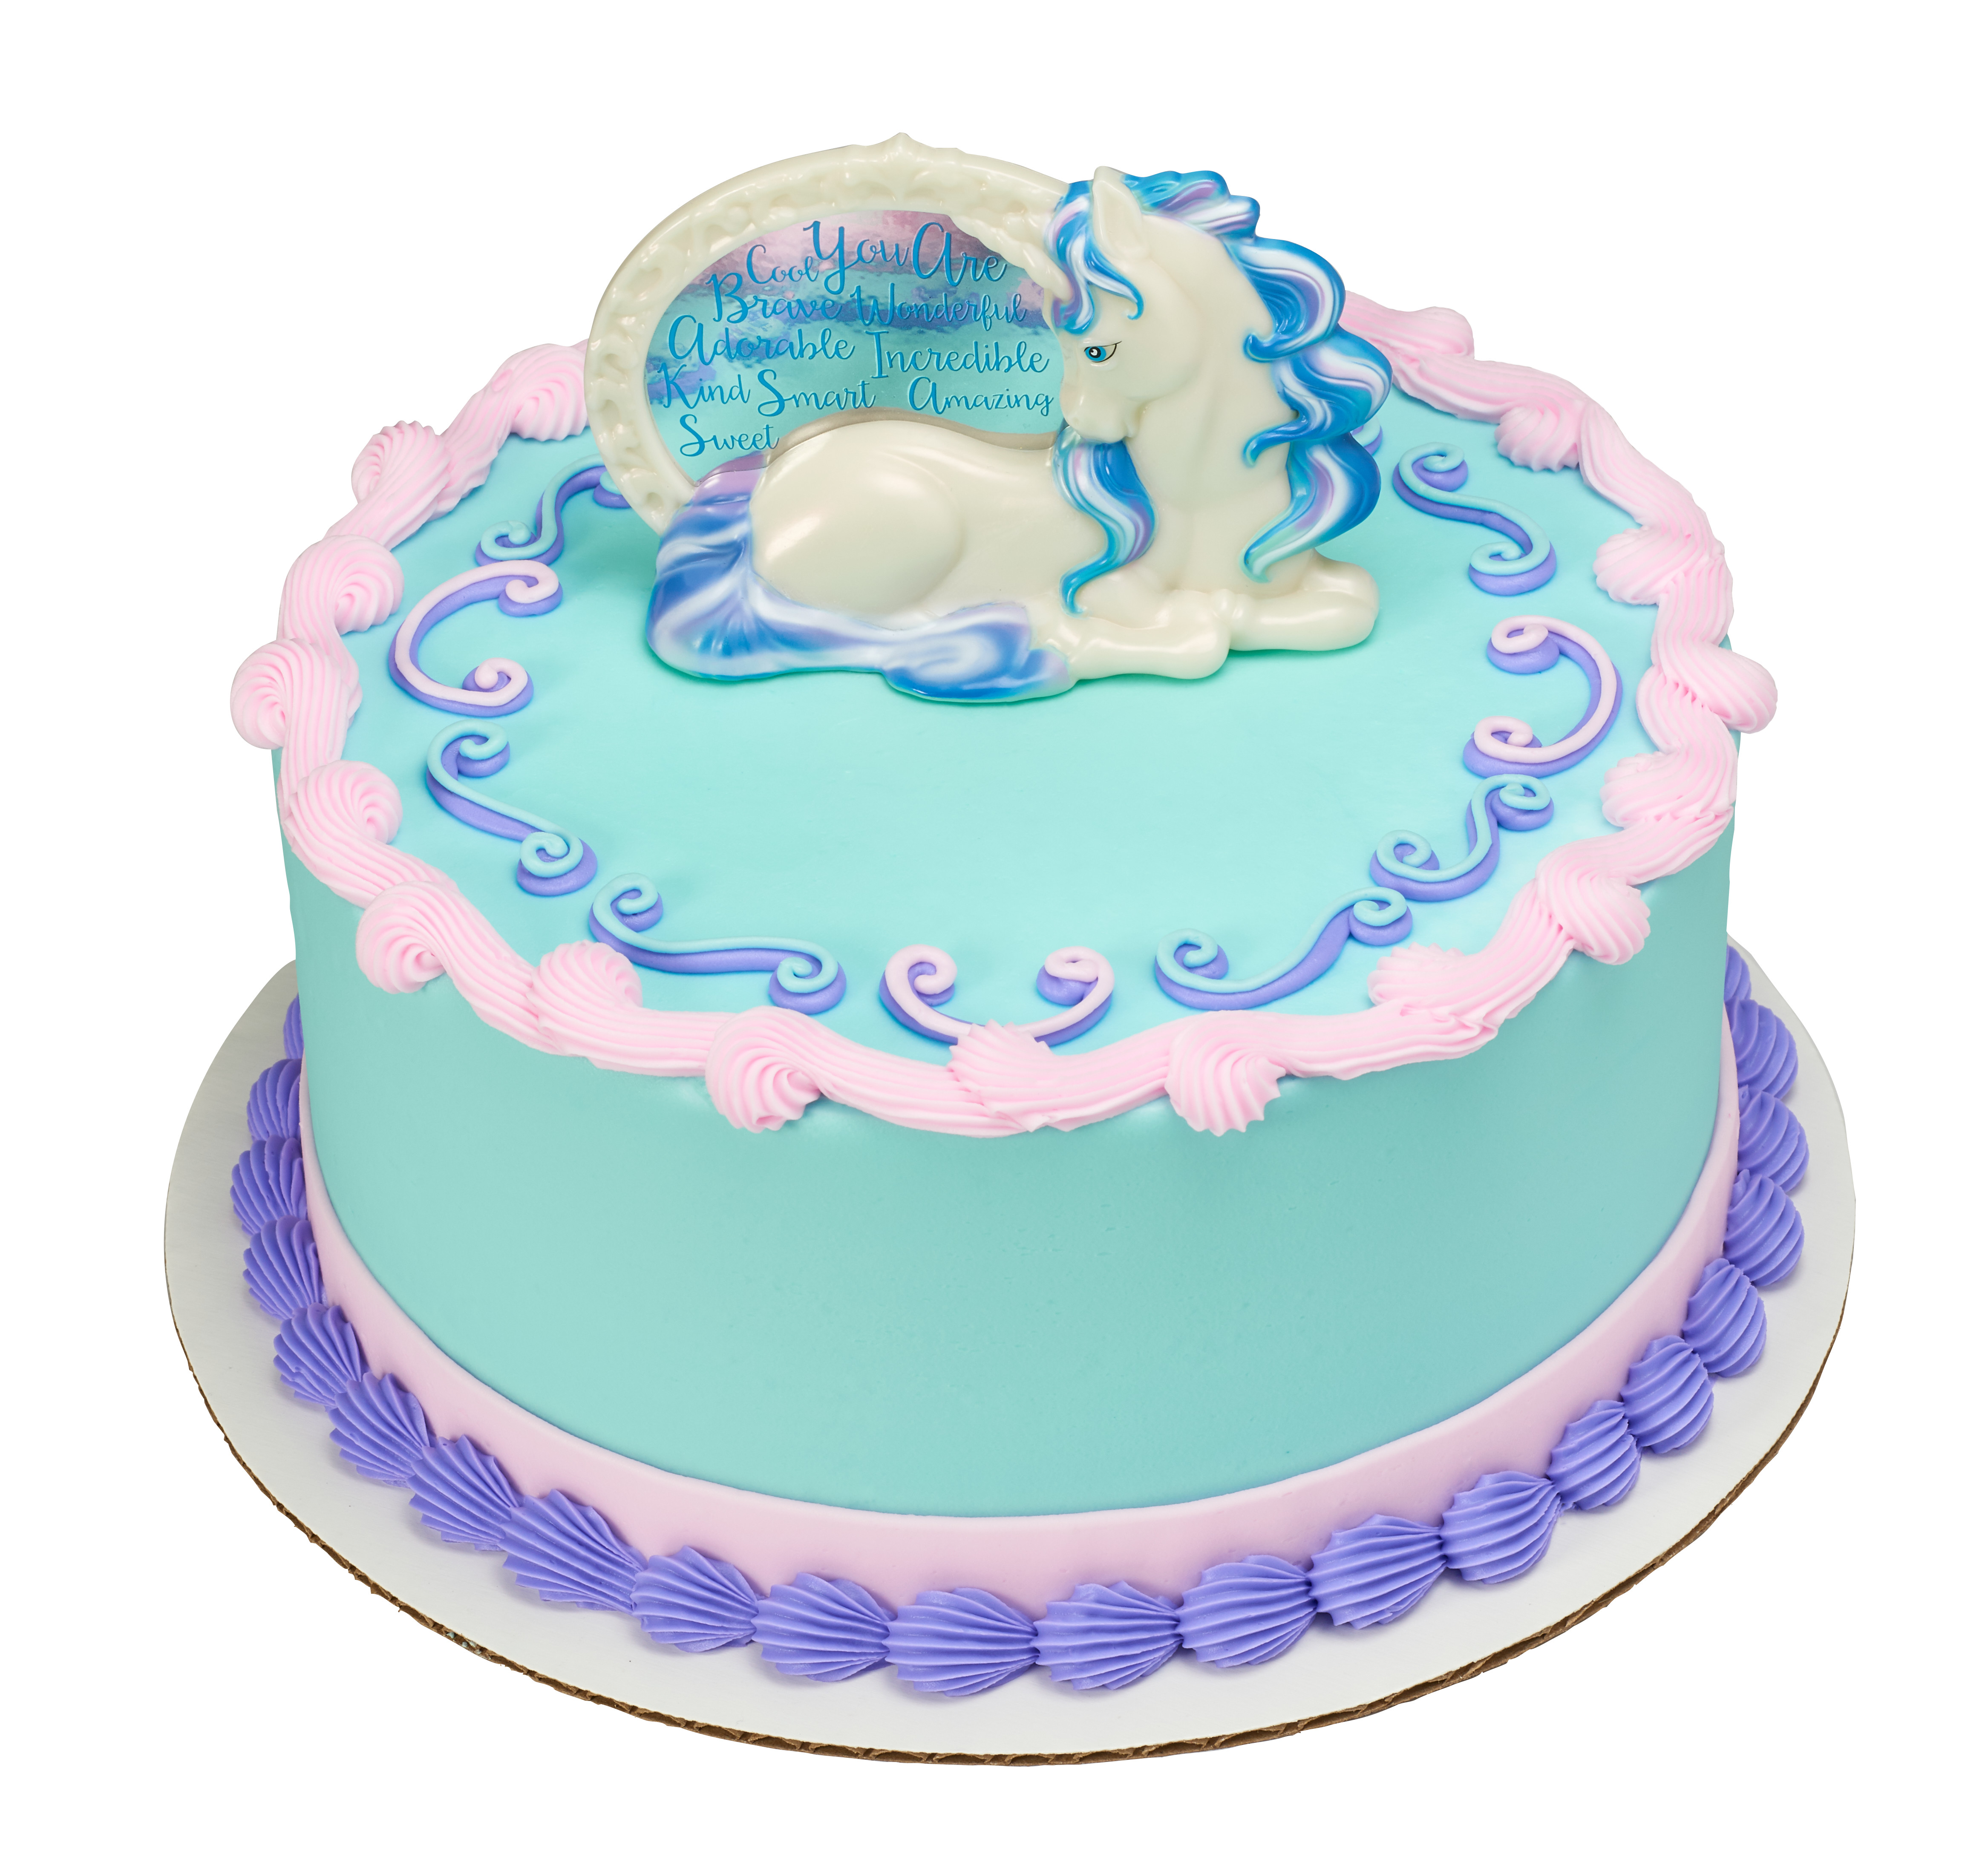 This cake features a molded unicorn that you can use as a figurine. 